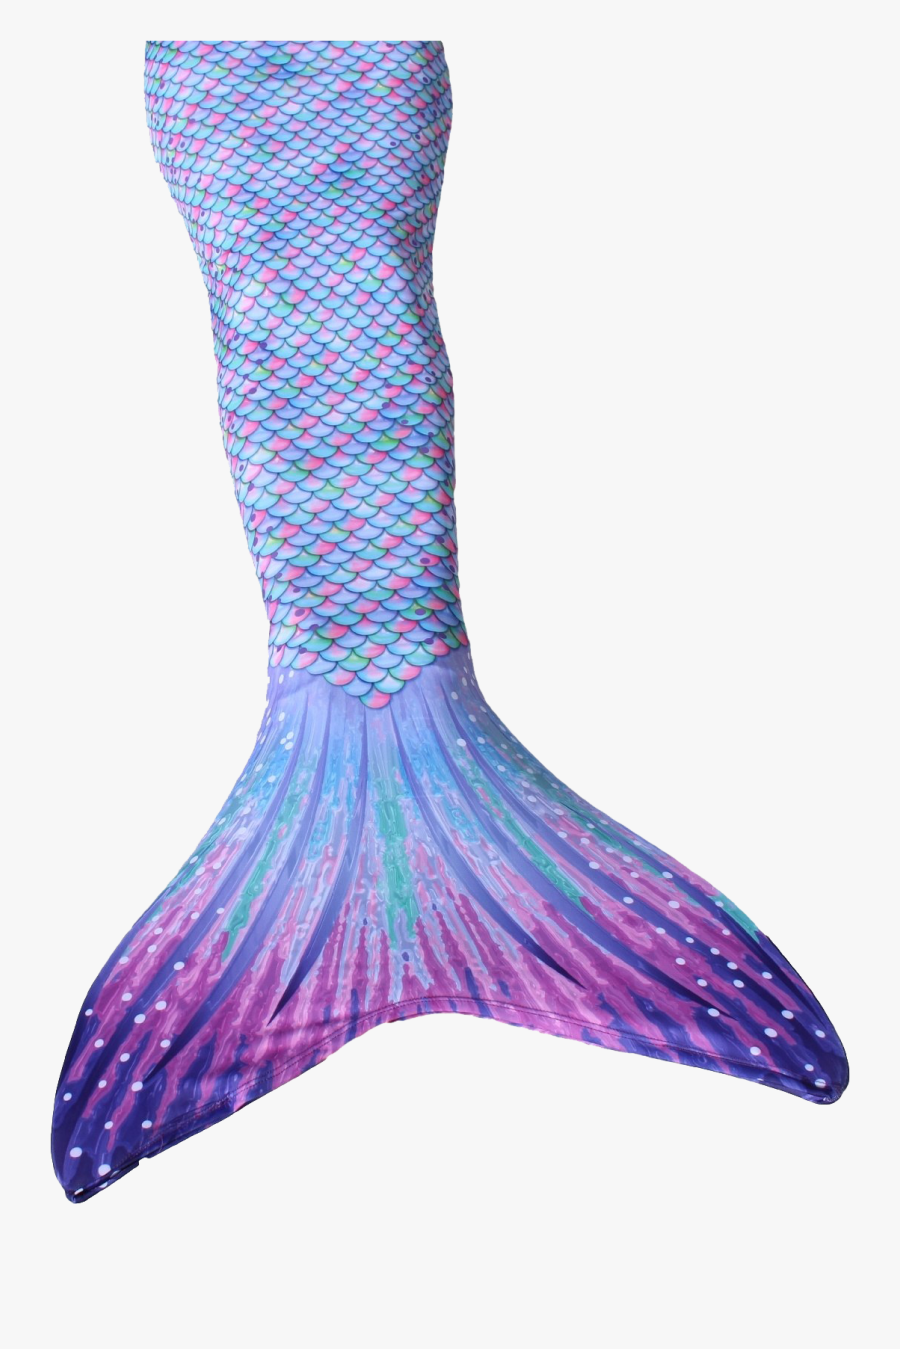 Mermaid Tail Png Image - Purple And Blue Mermaid Tail, Transparent Clipart